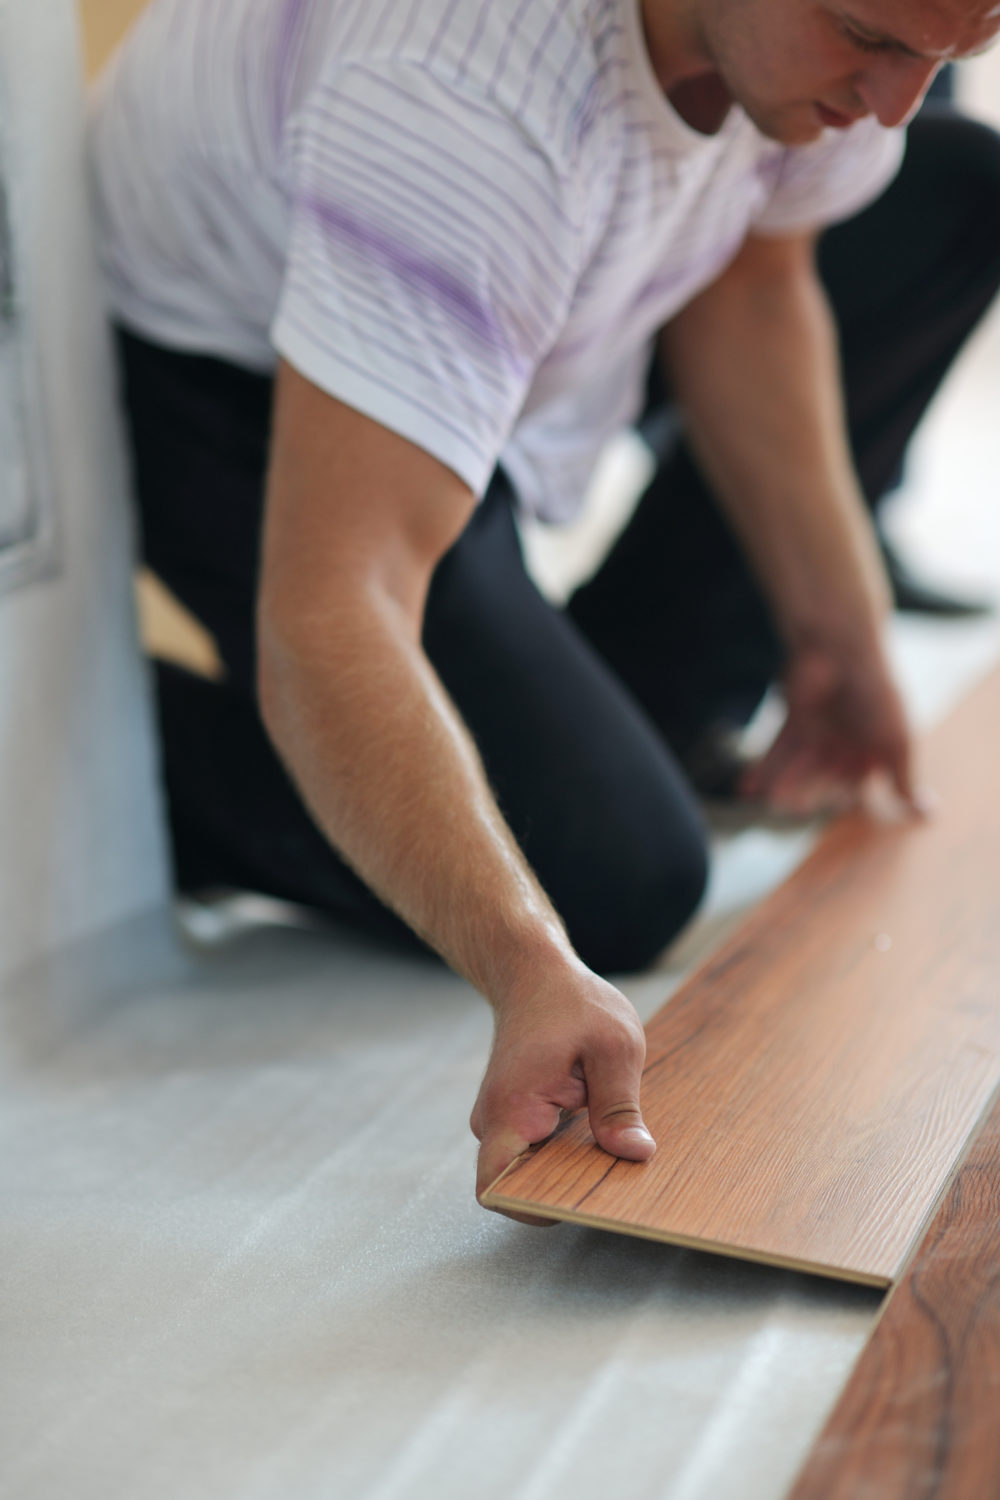 5 Things to consider when buying laminate flooring